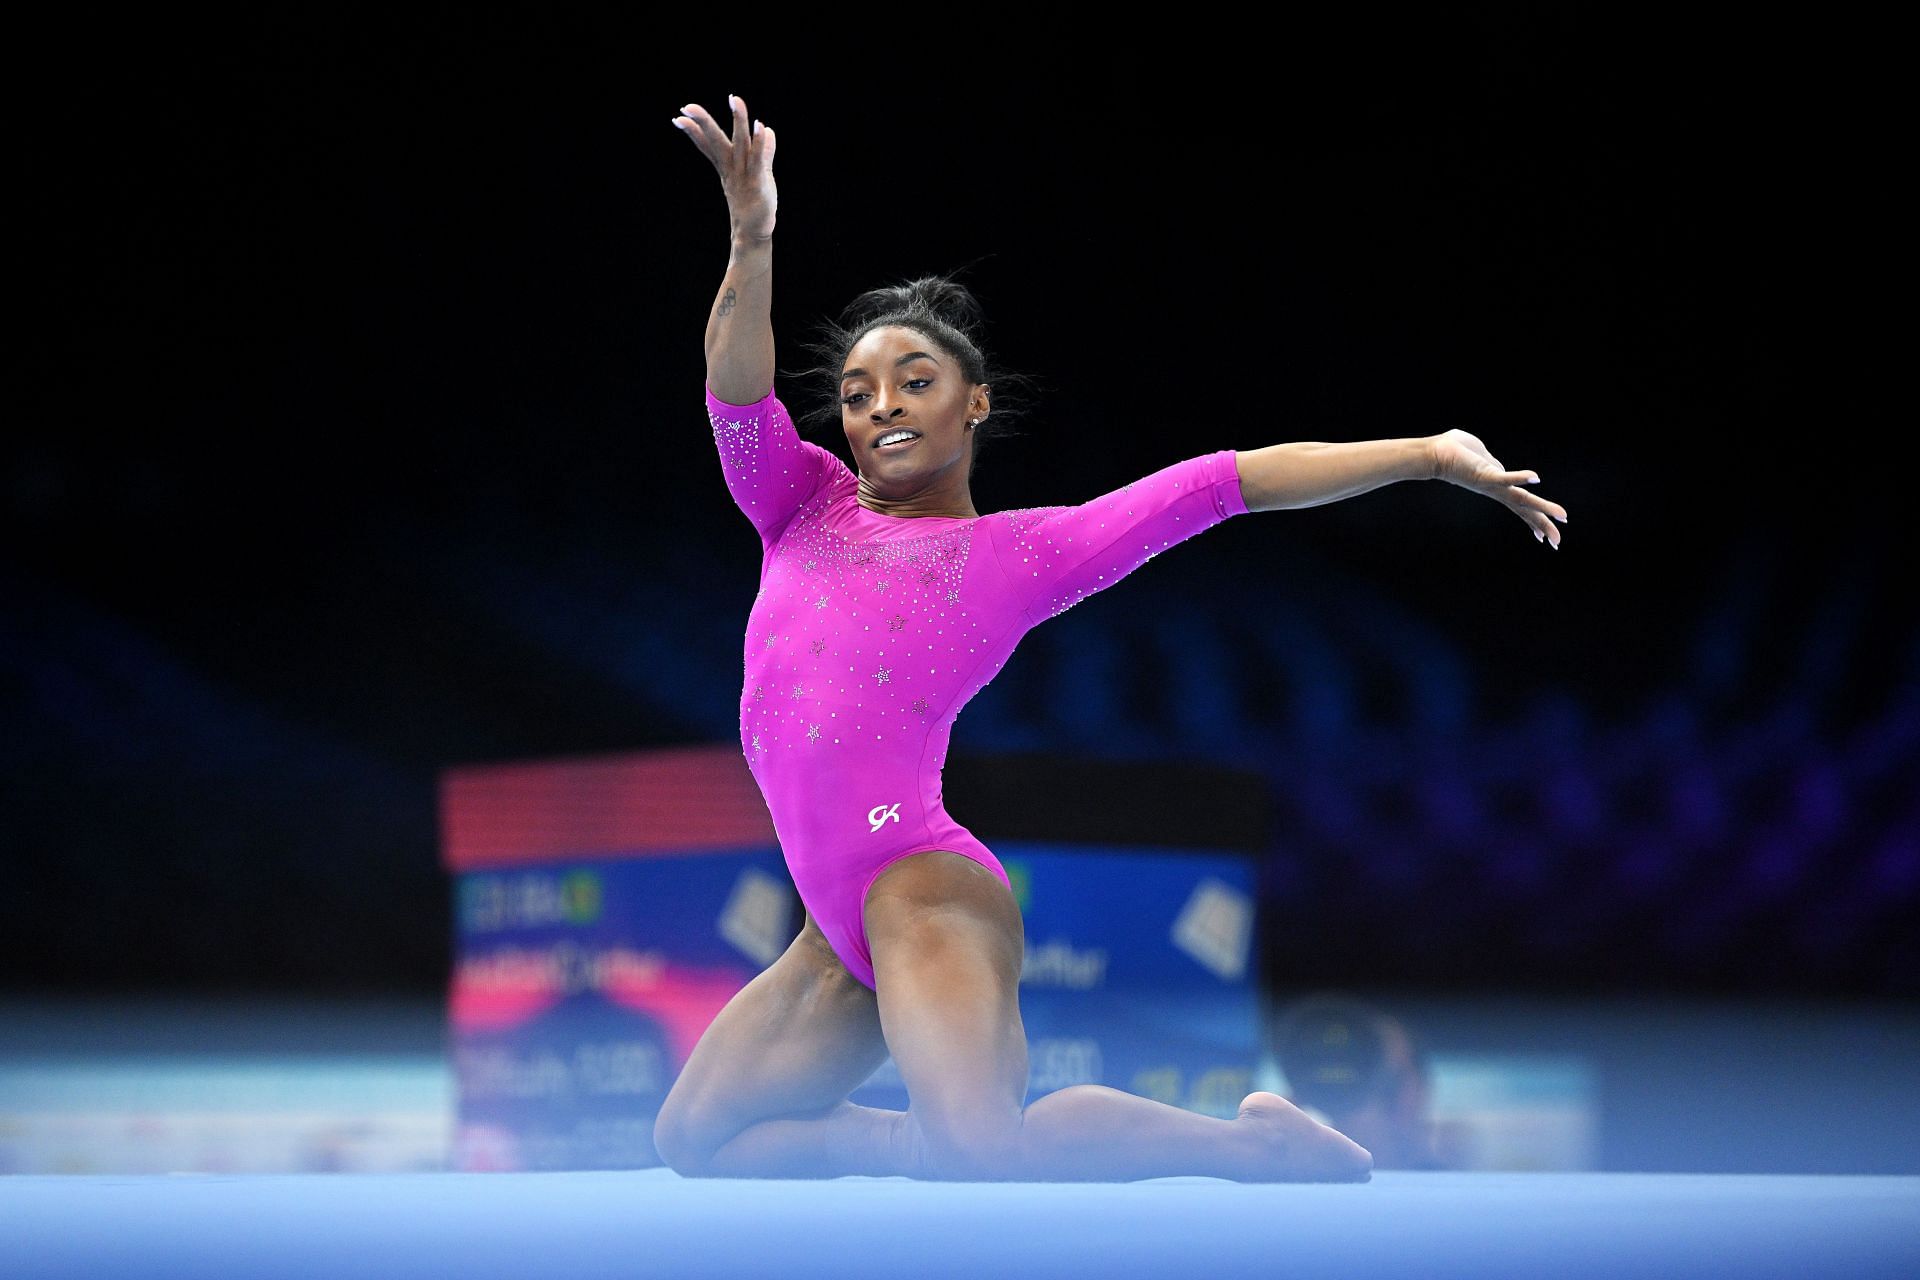 Simone Biles practices the floor exercise routine during the 2023 FIG Artistic Gymnastics World Championships in Antwerp, Belgium